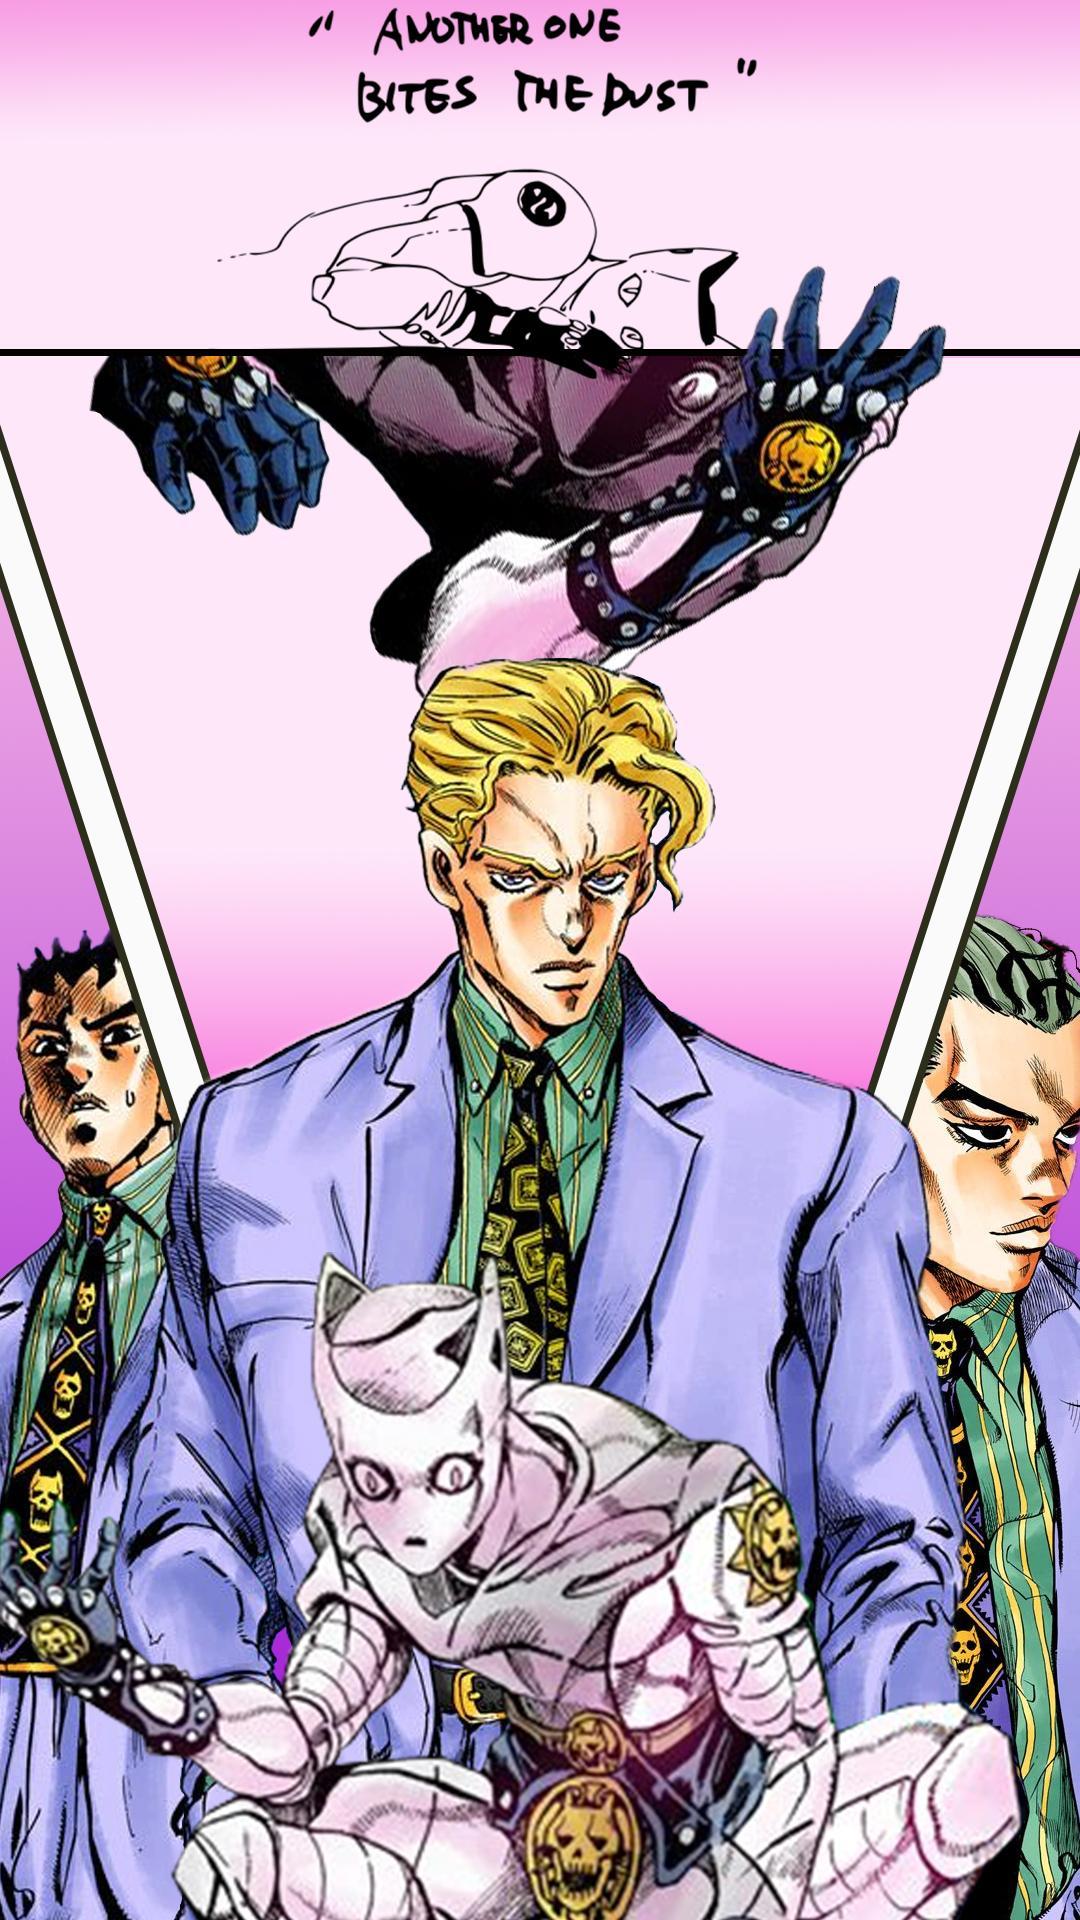 Phone wallpaper of the 3 stages of Kira Yoshikage